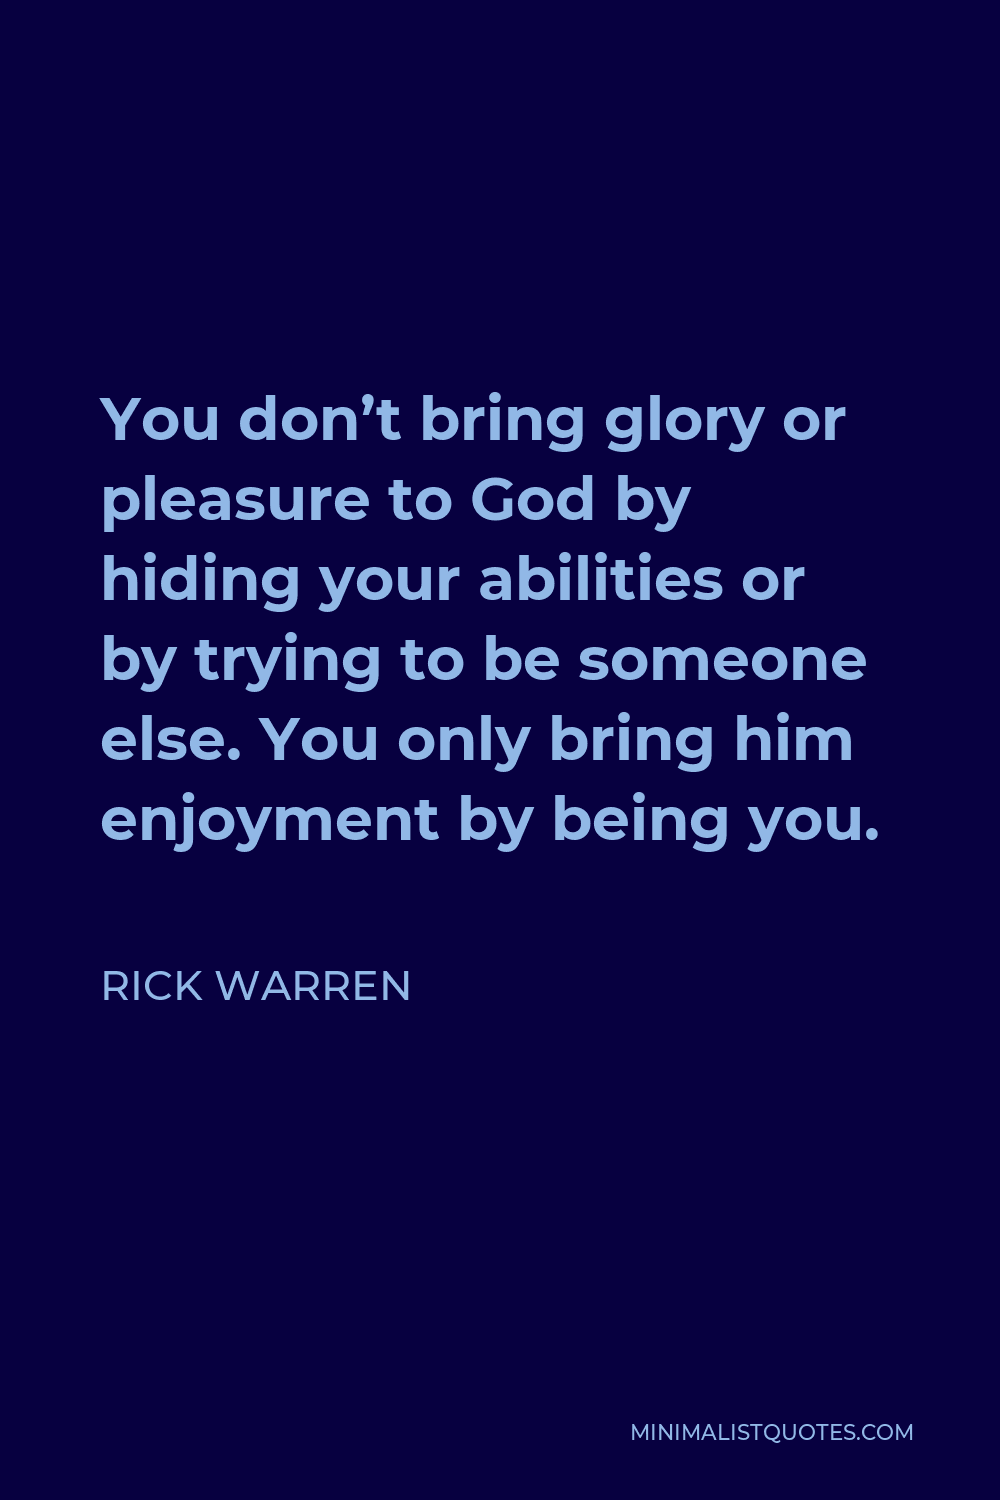 Rick Warren Quote - You don’t bring glory or pleasure to God by hiding your abilities or by trying to be someone else. You only bring him enjoyment by being you.